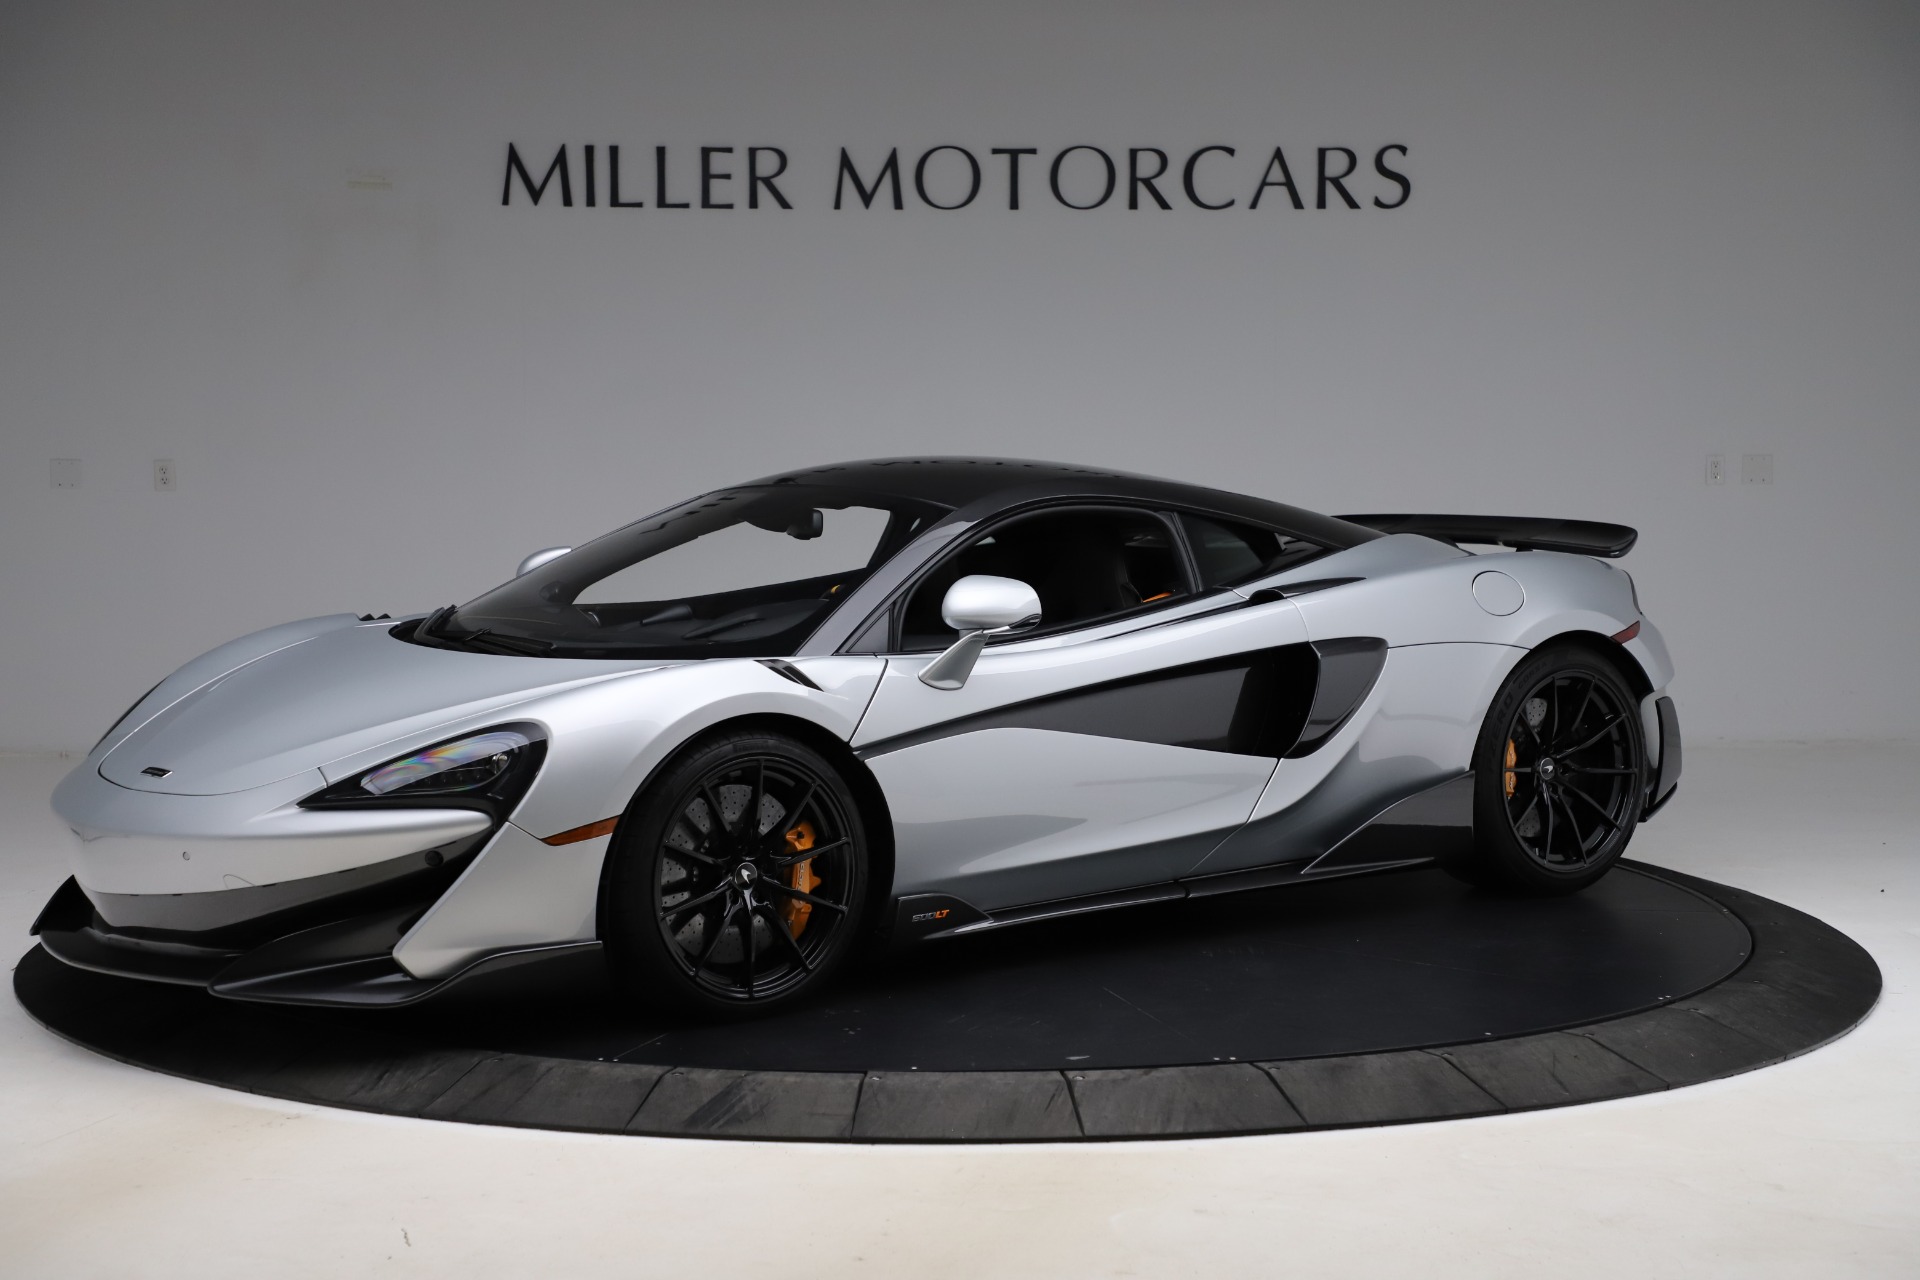 Used 2019 McLaren 600LT for sale Sold at Maserati of Greenwich in Greenwich CT 06830 1